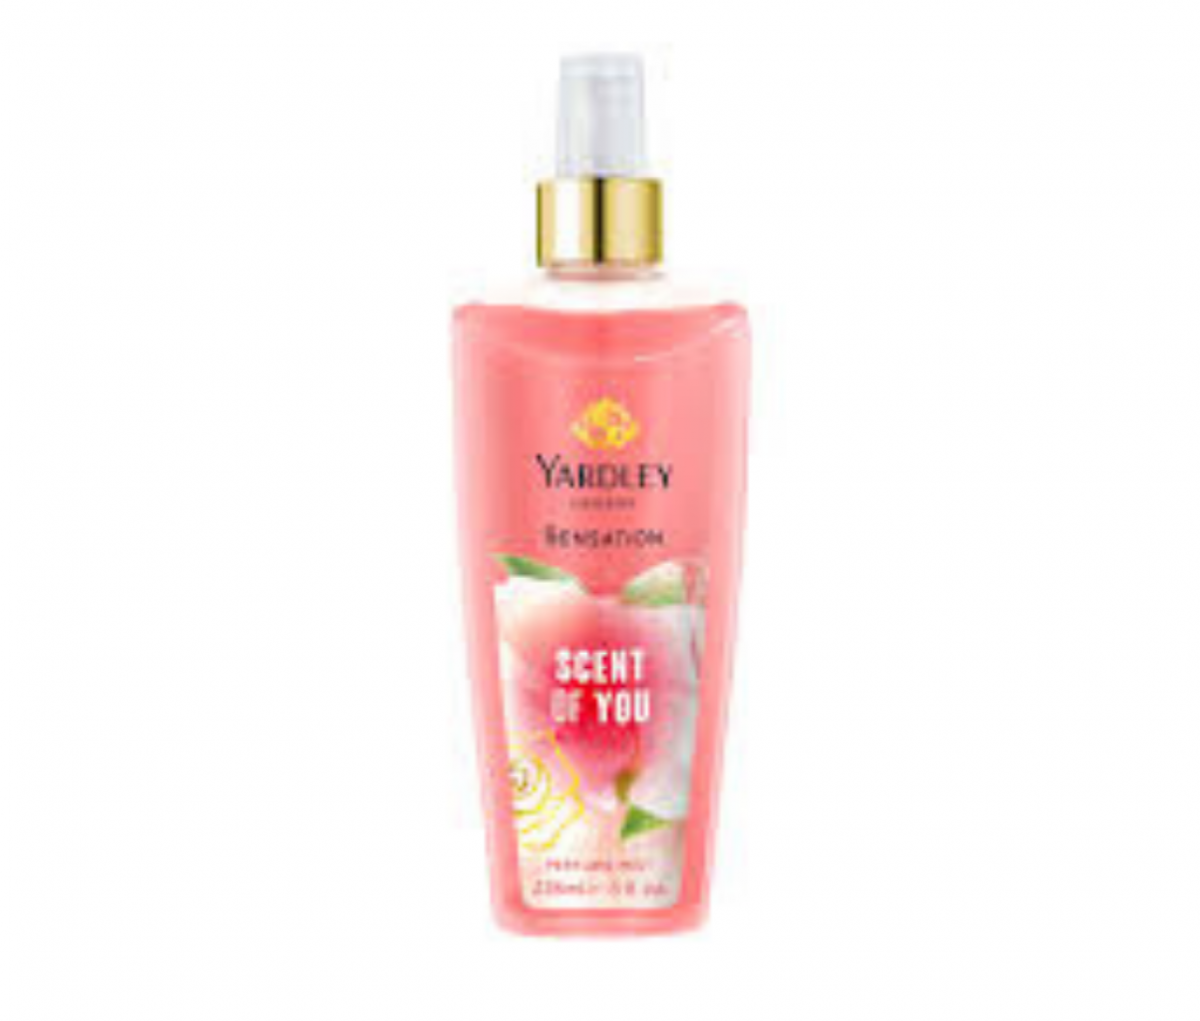 Yardley Body Mist 236ml Scent of You